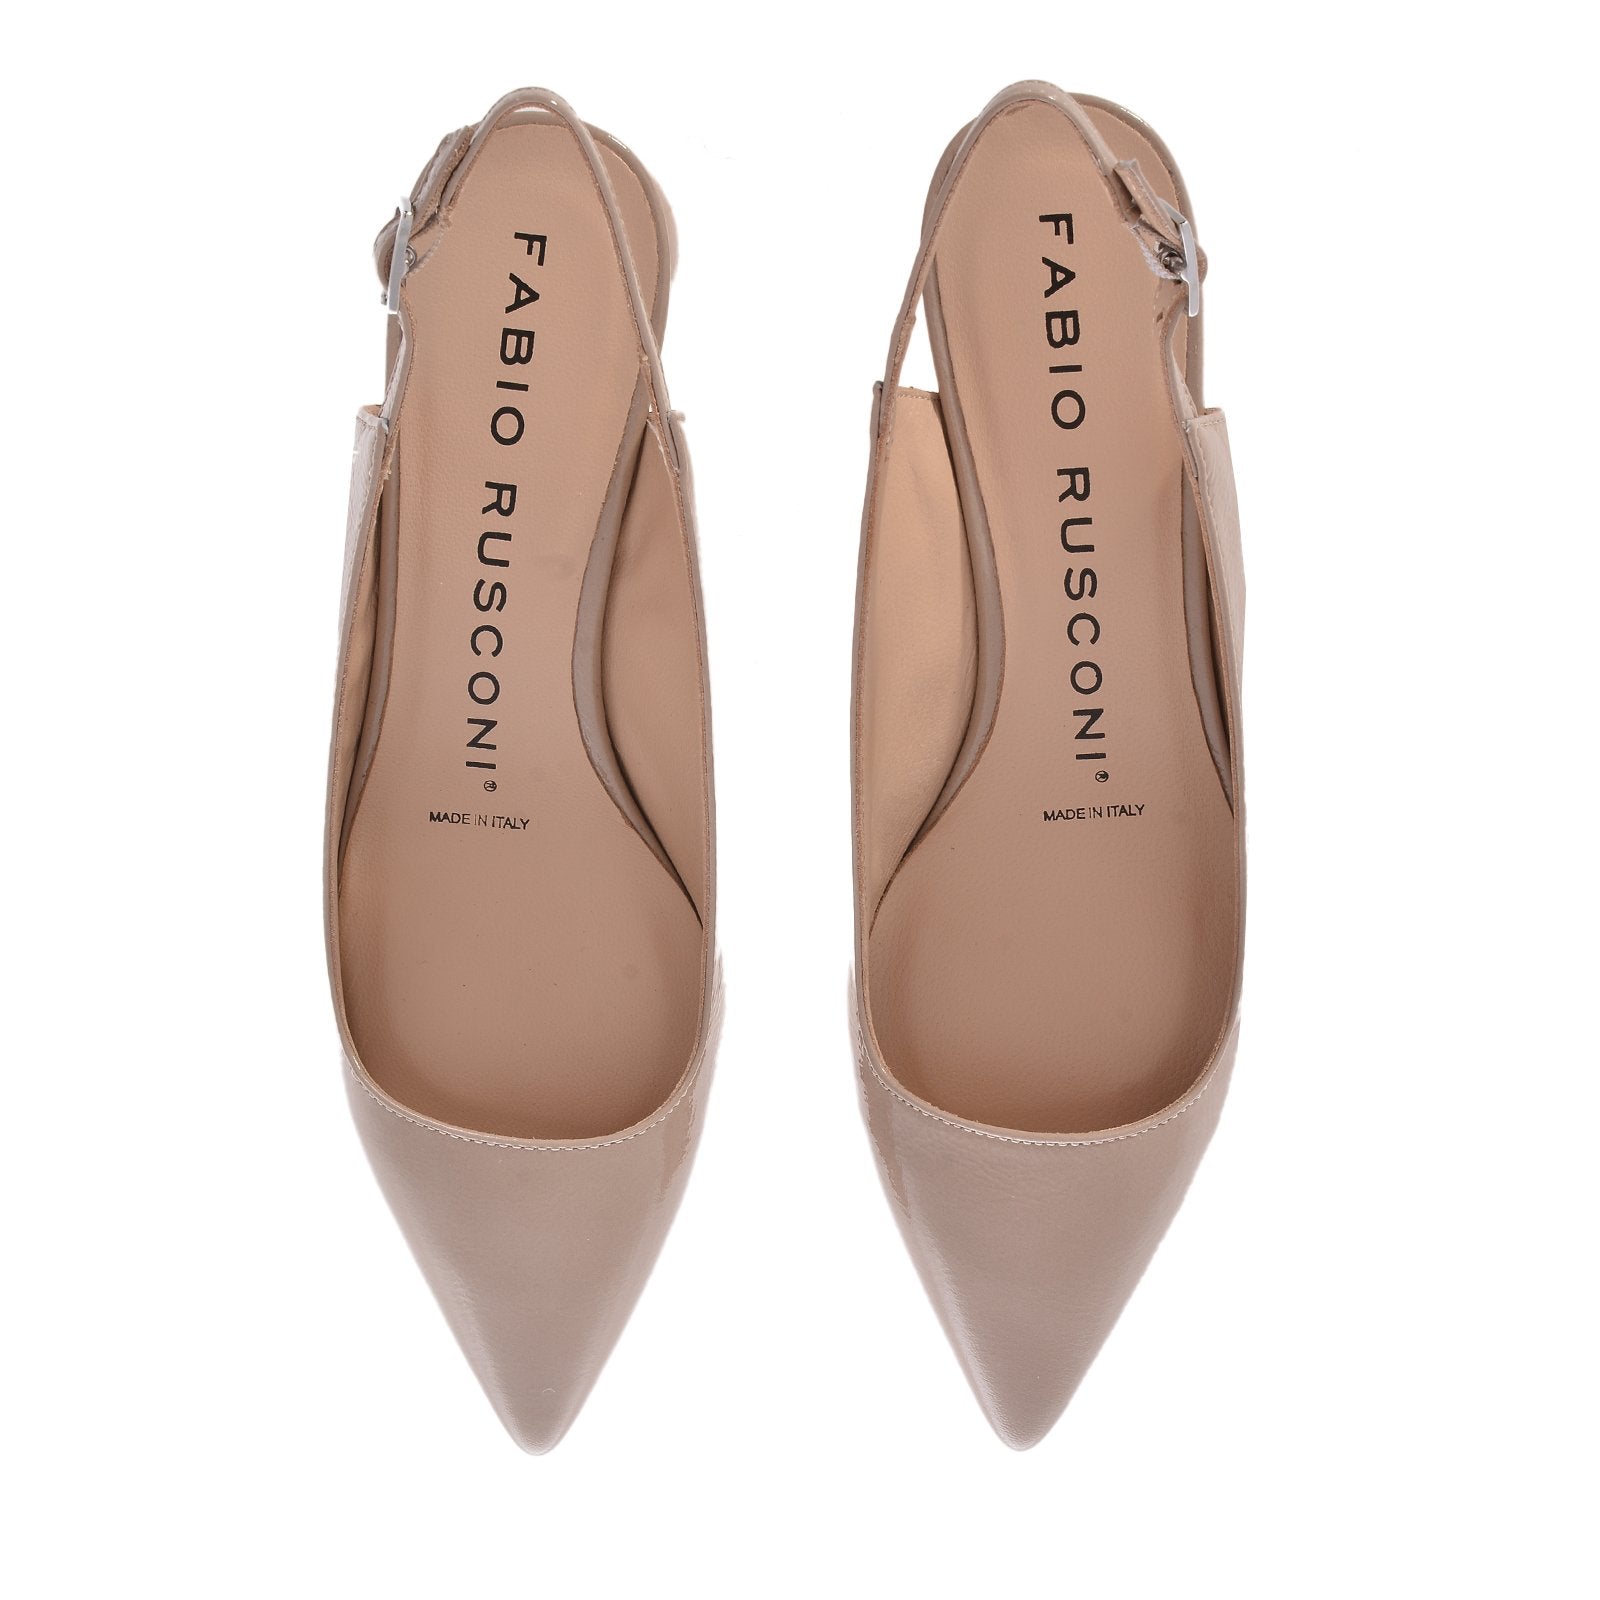 Naplak Leather Slingback Shoes In Nude Heels NUDE2382 - 4